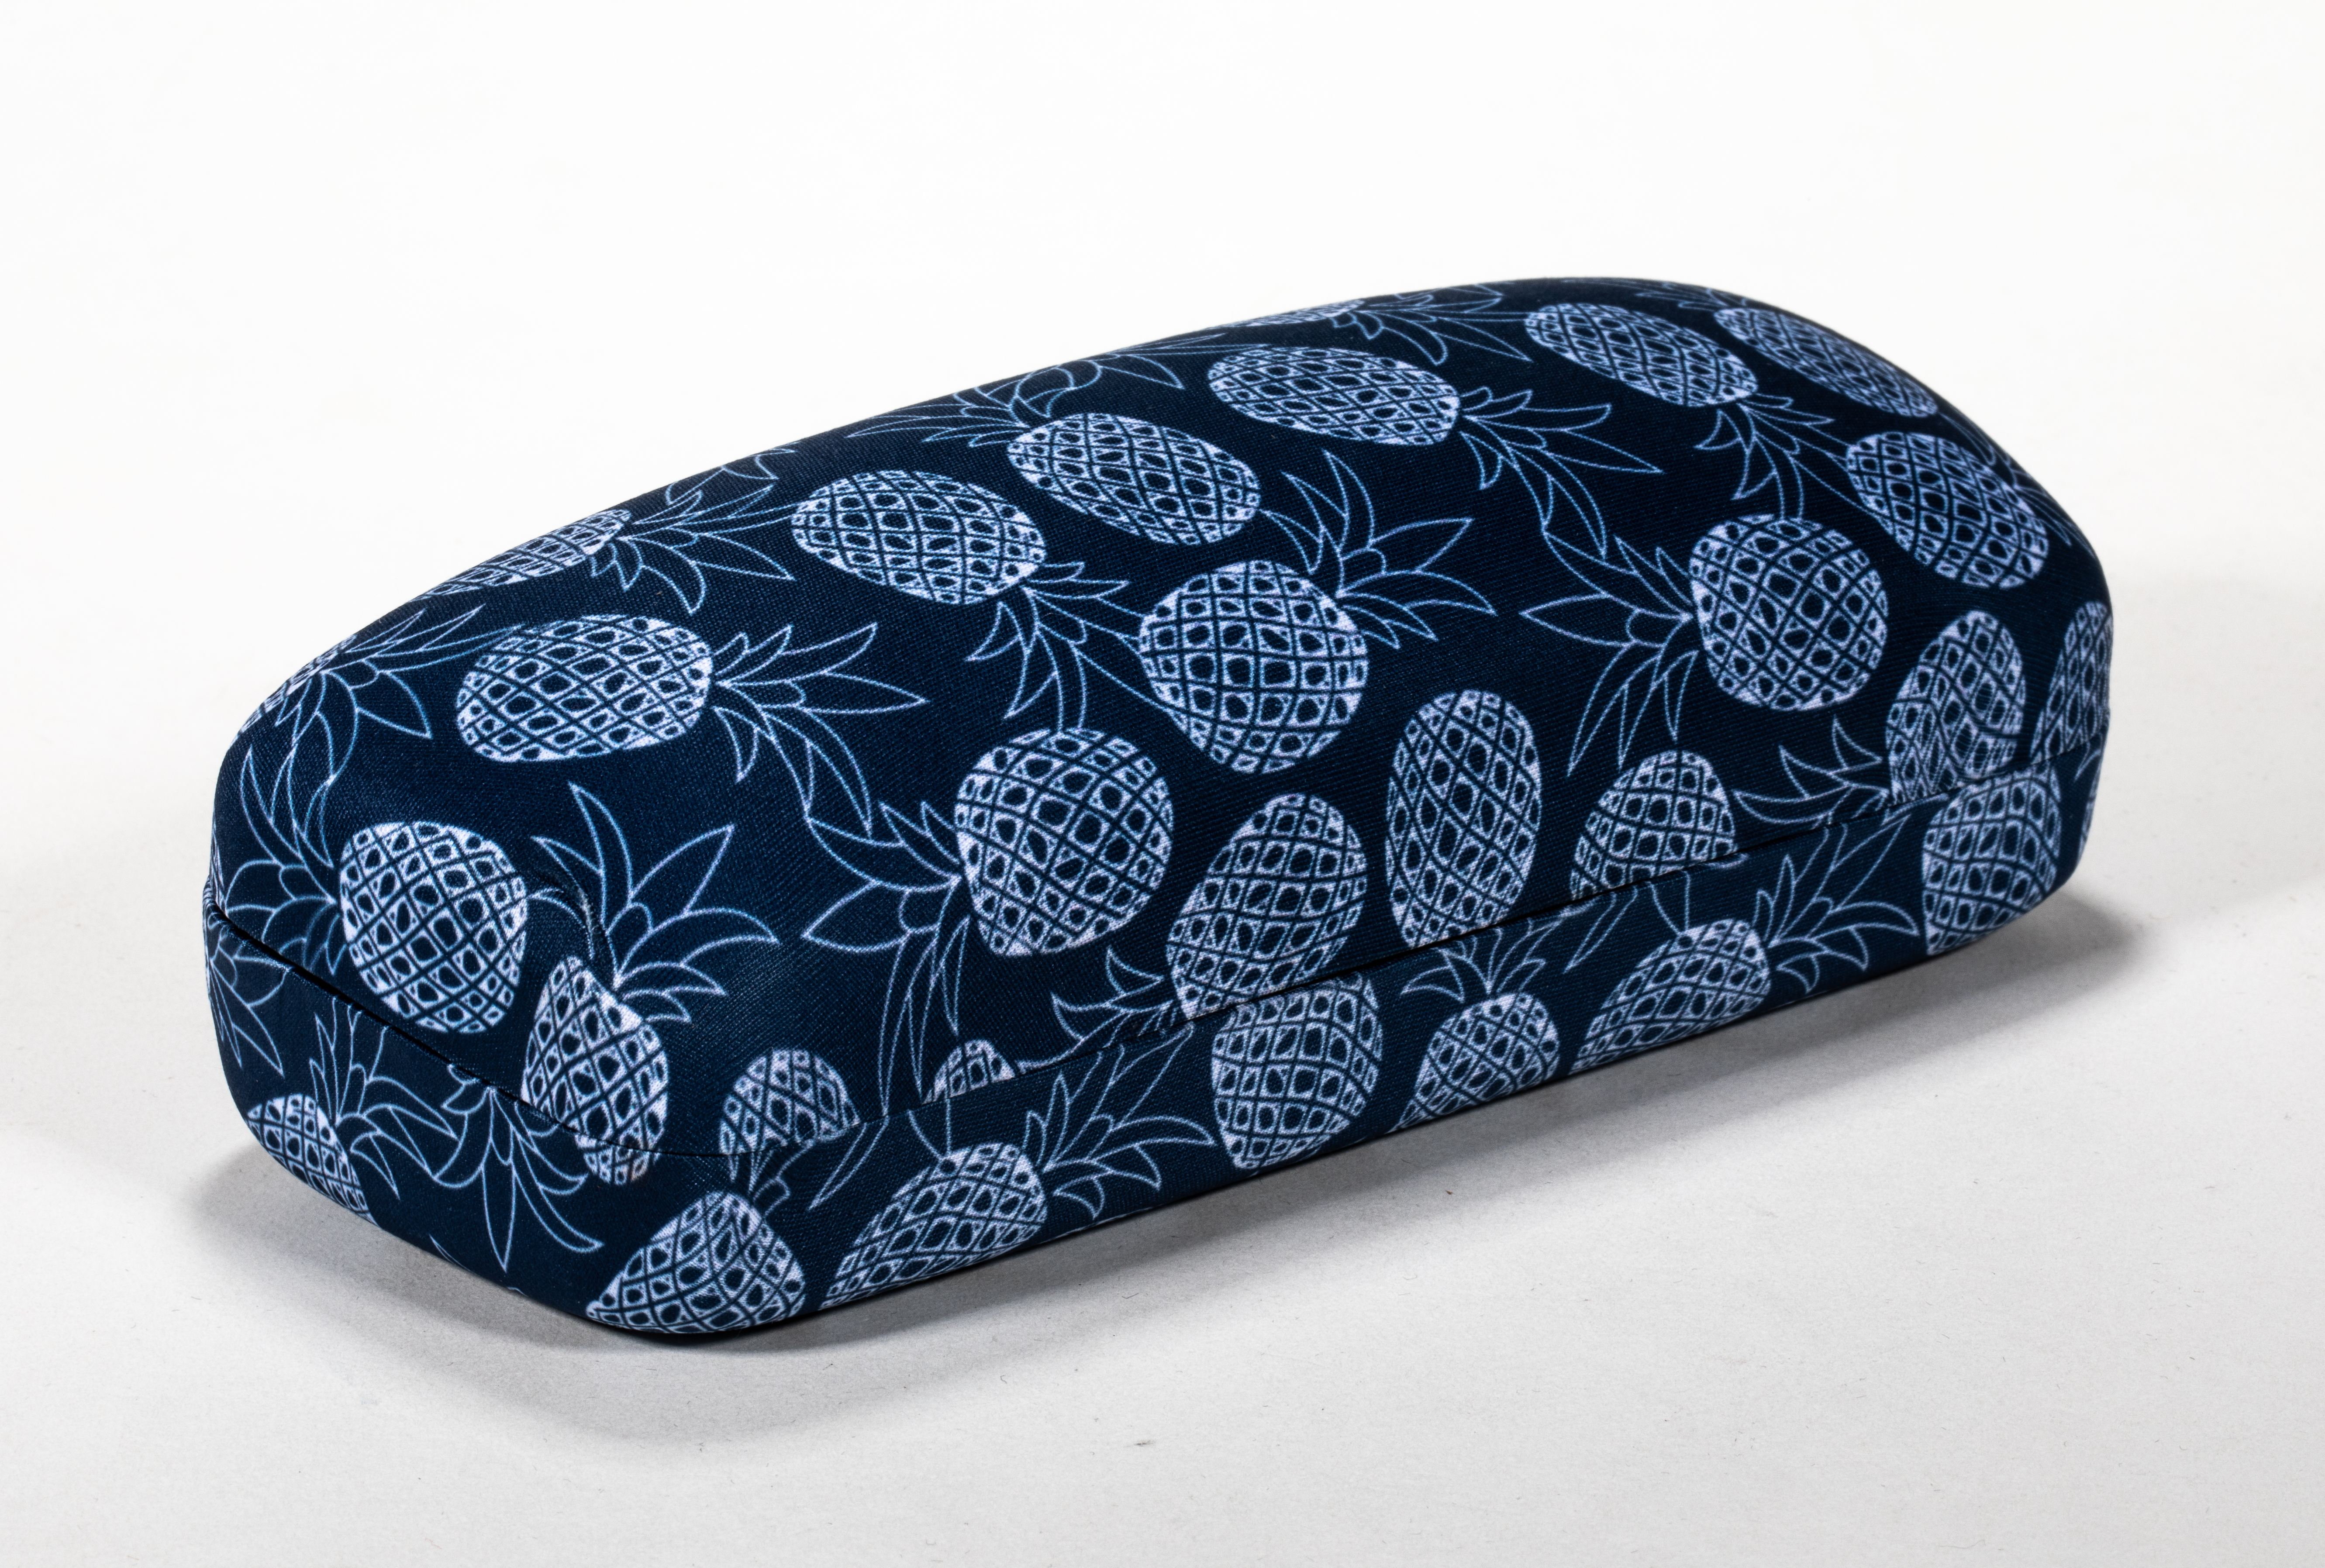 2021 Glasses Case Sunglasses Dark Blue Glasses Case Printed with A Pineapple Pattern